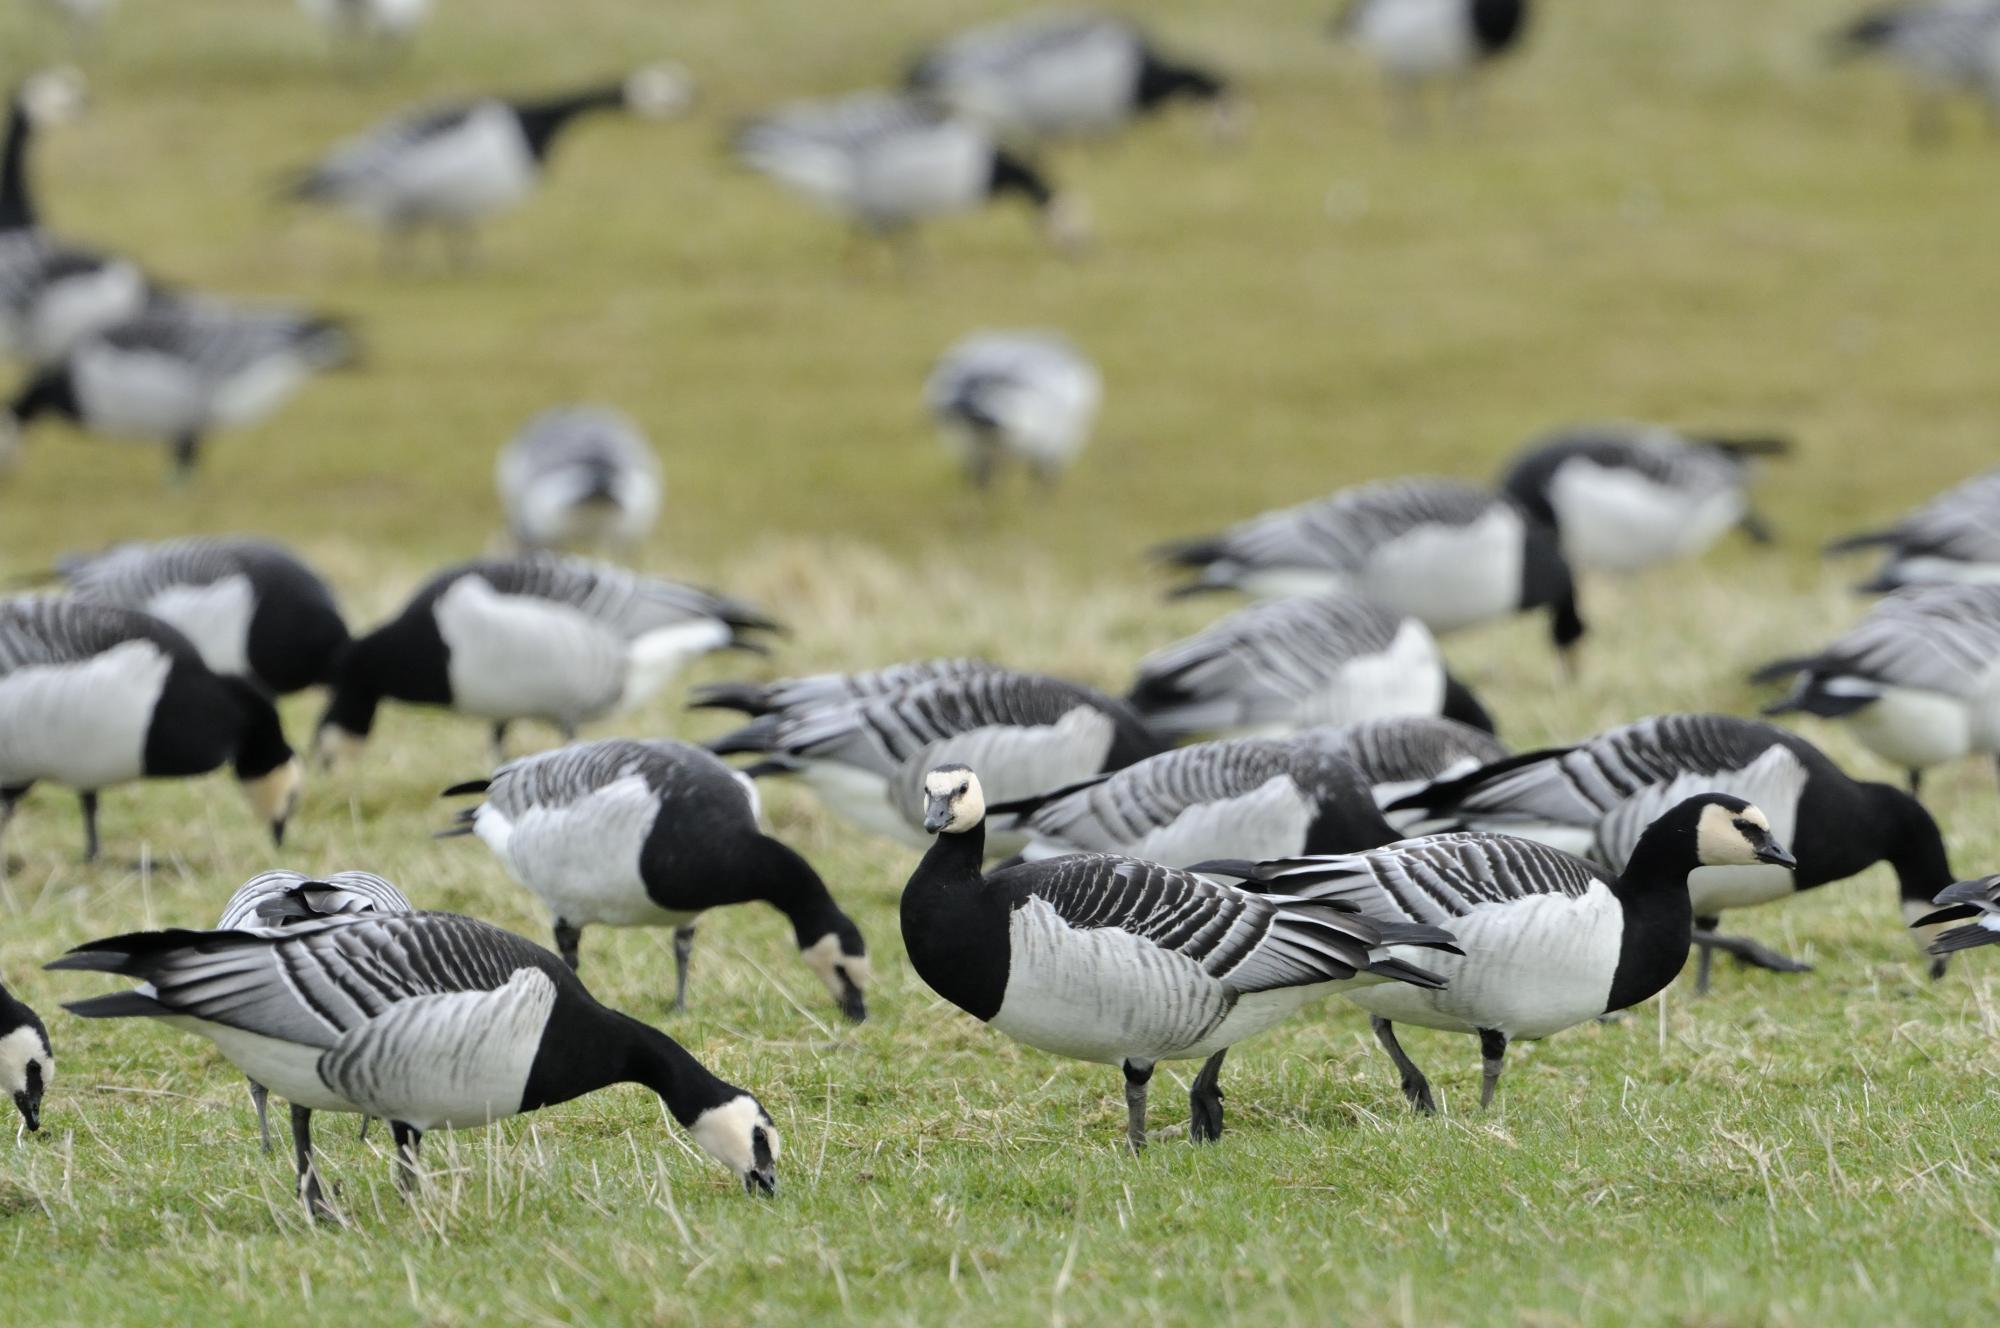 Barnacle geese on grassland.